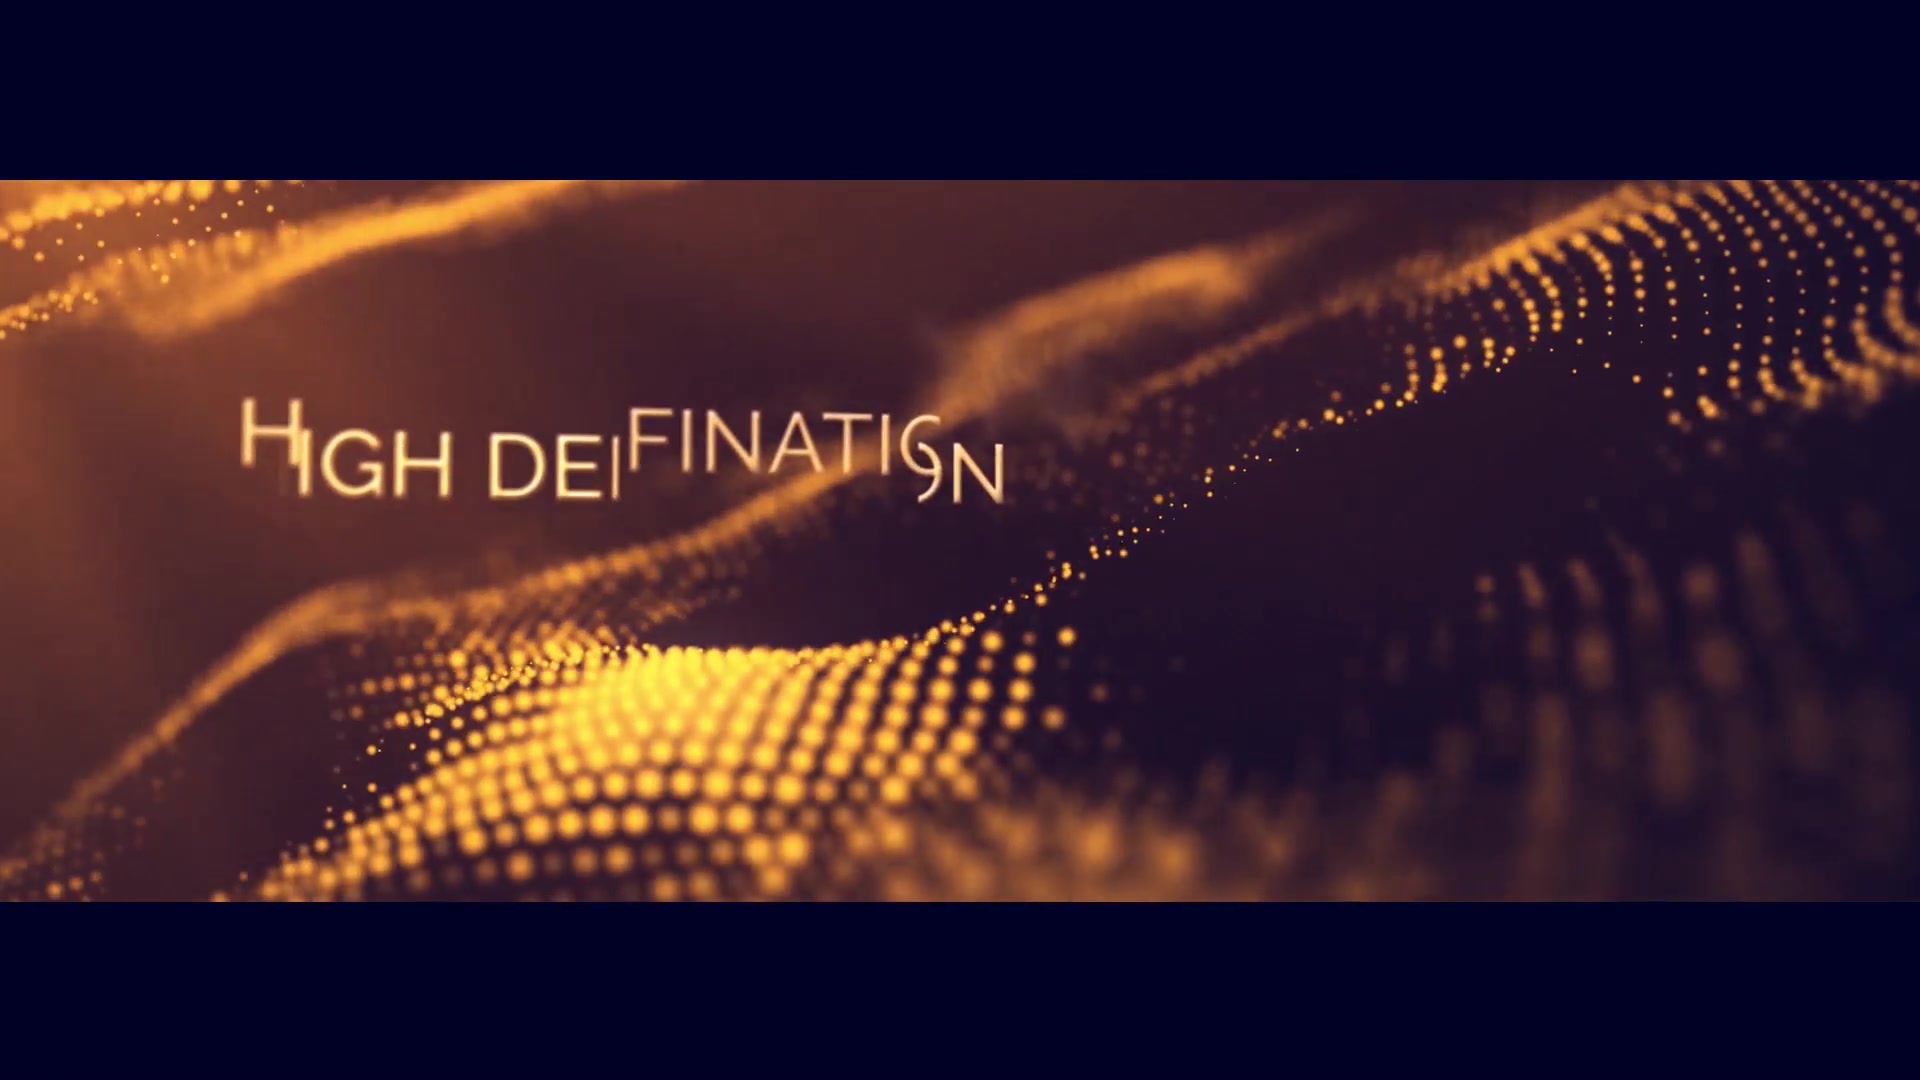 The Fusion - Download Videohive 22405386